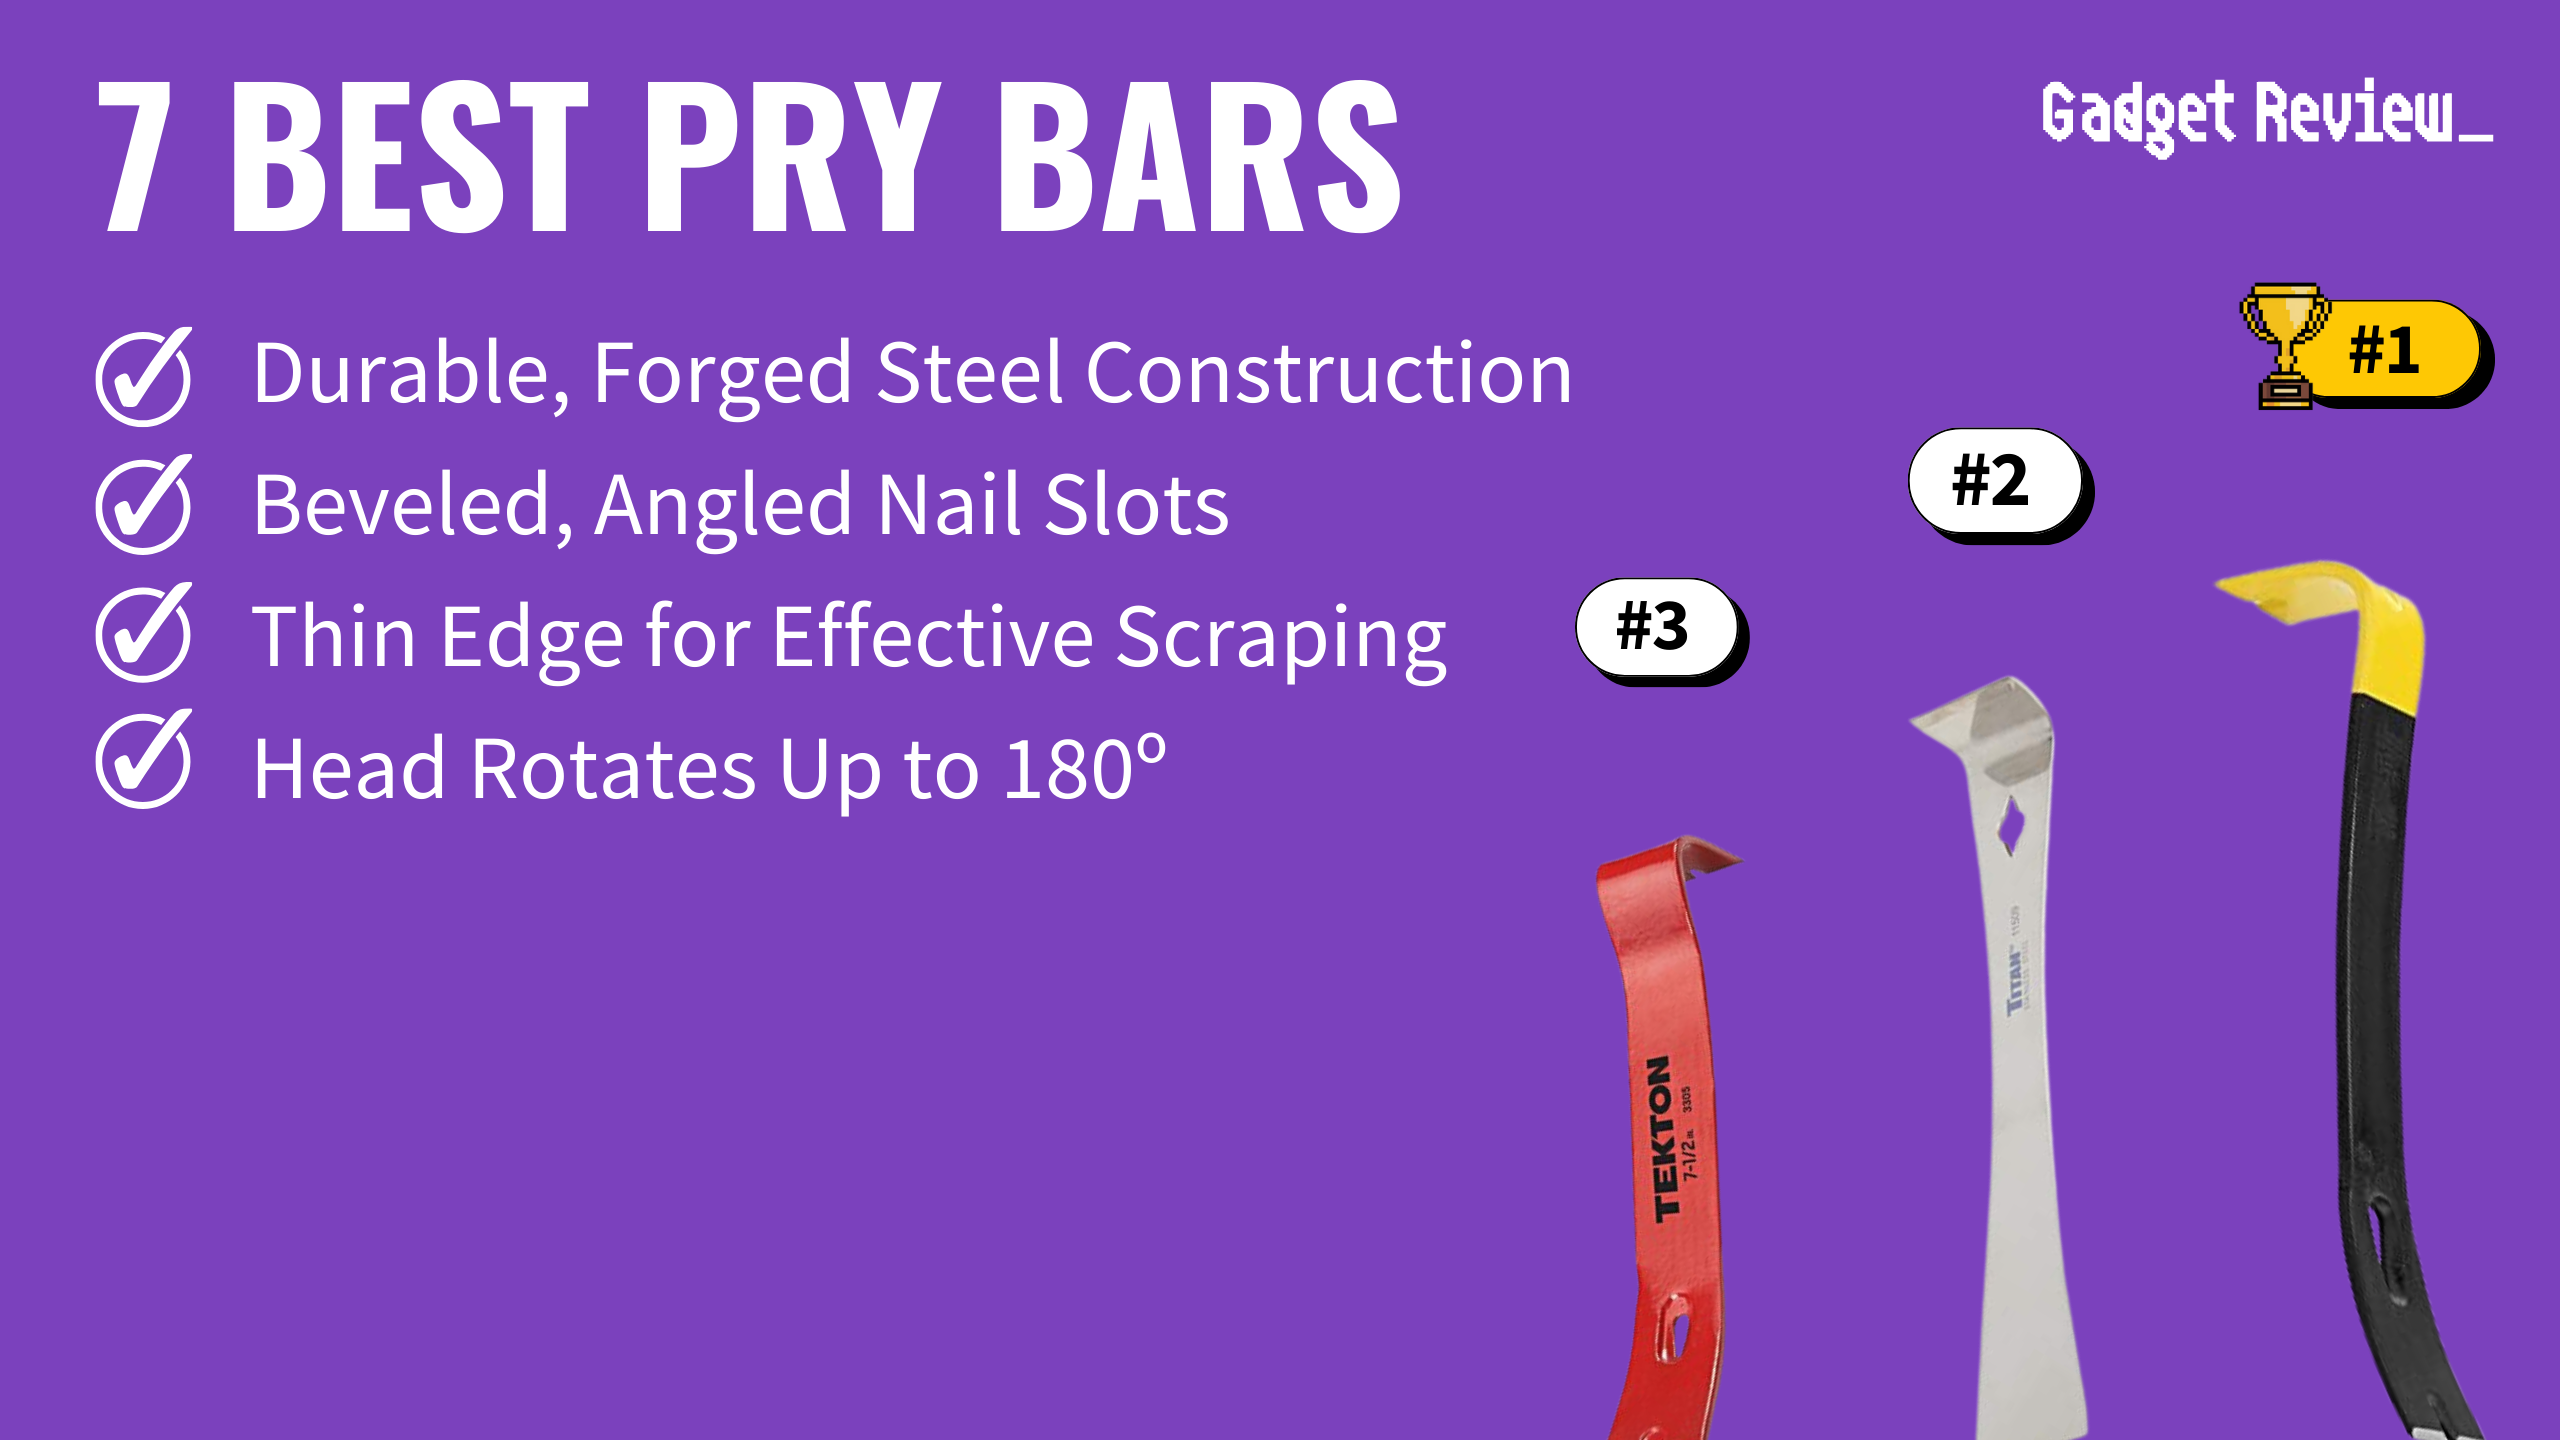 best pry bars featured image that shows the top three best tool models